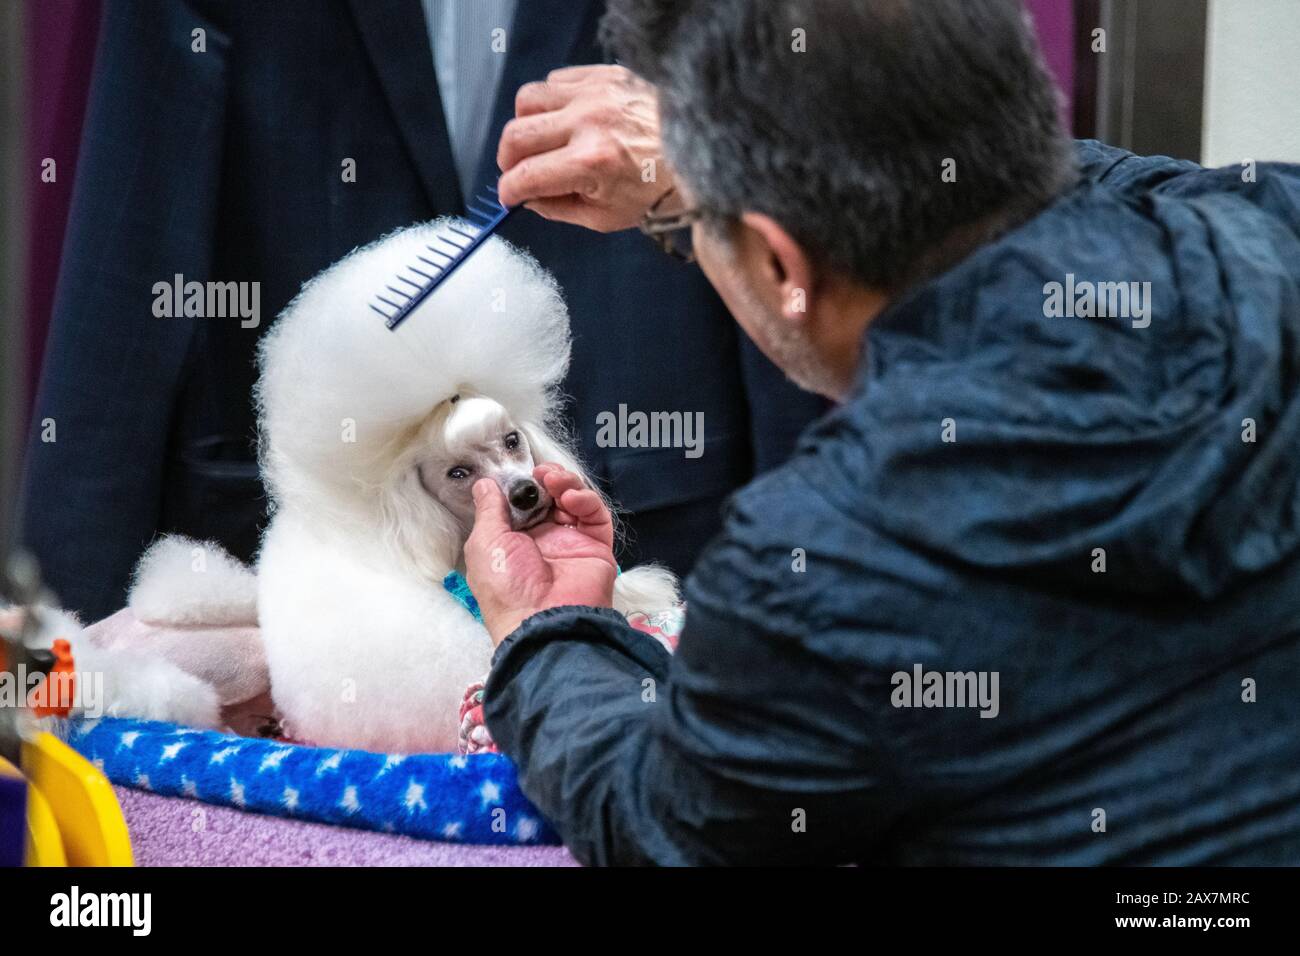 New York, USA. 10th Feb, 2020. Cami the Toy Poodle gets groomed backstage before competing in the Toy group category at the 144th Westminster Kennel Club Dog show in New York city's Madison Square Garden. Cami, a 4-year-old veteran competitor whose formal competition name is Smash Jp Copenhagen, took 3rd place.  Credit: Enrique Shore/Alamy Live News Stock Photo